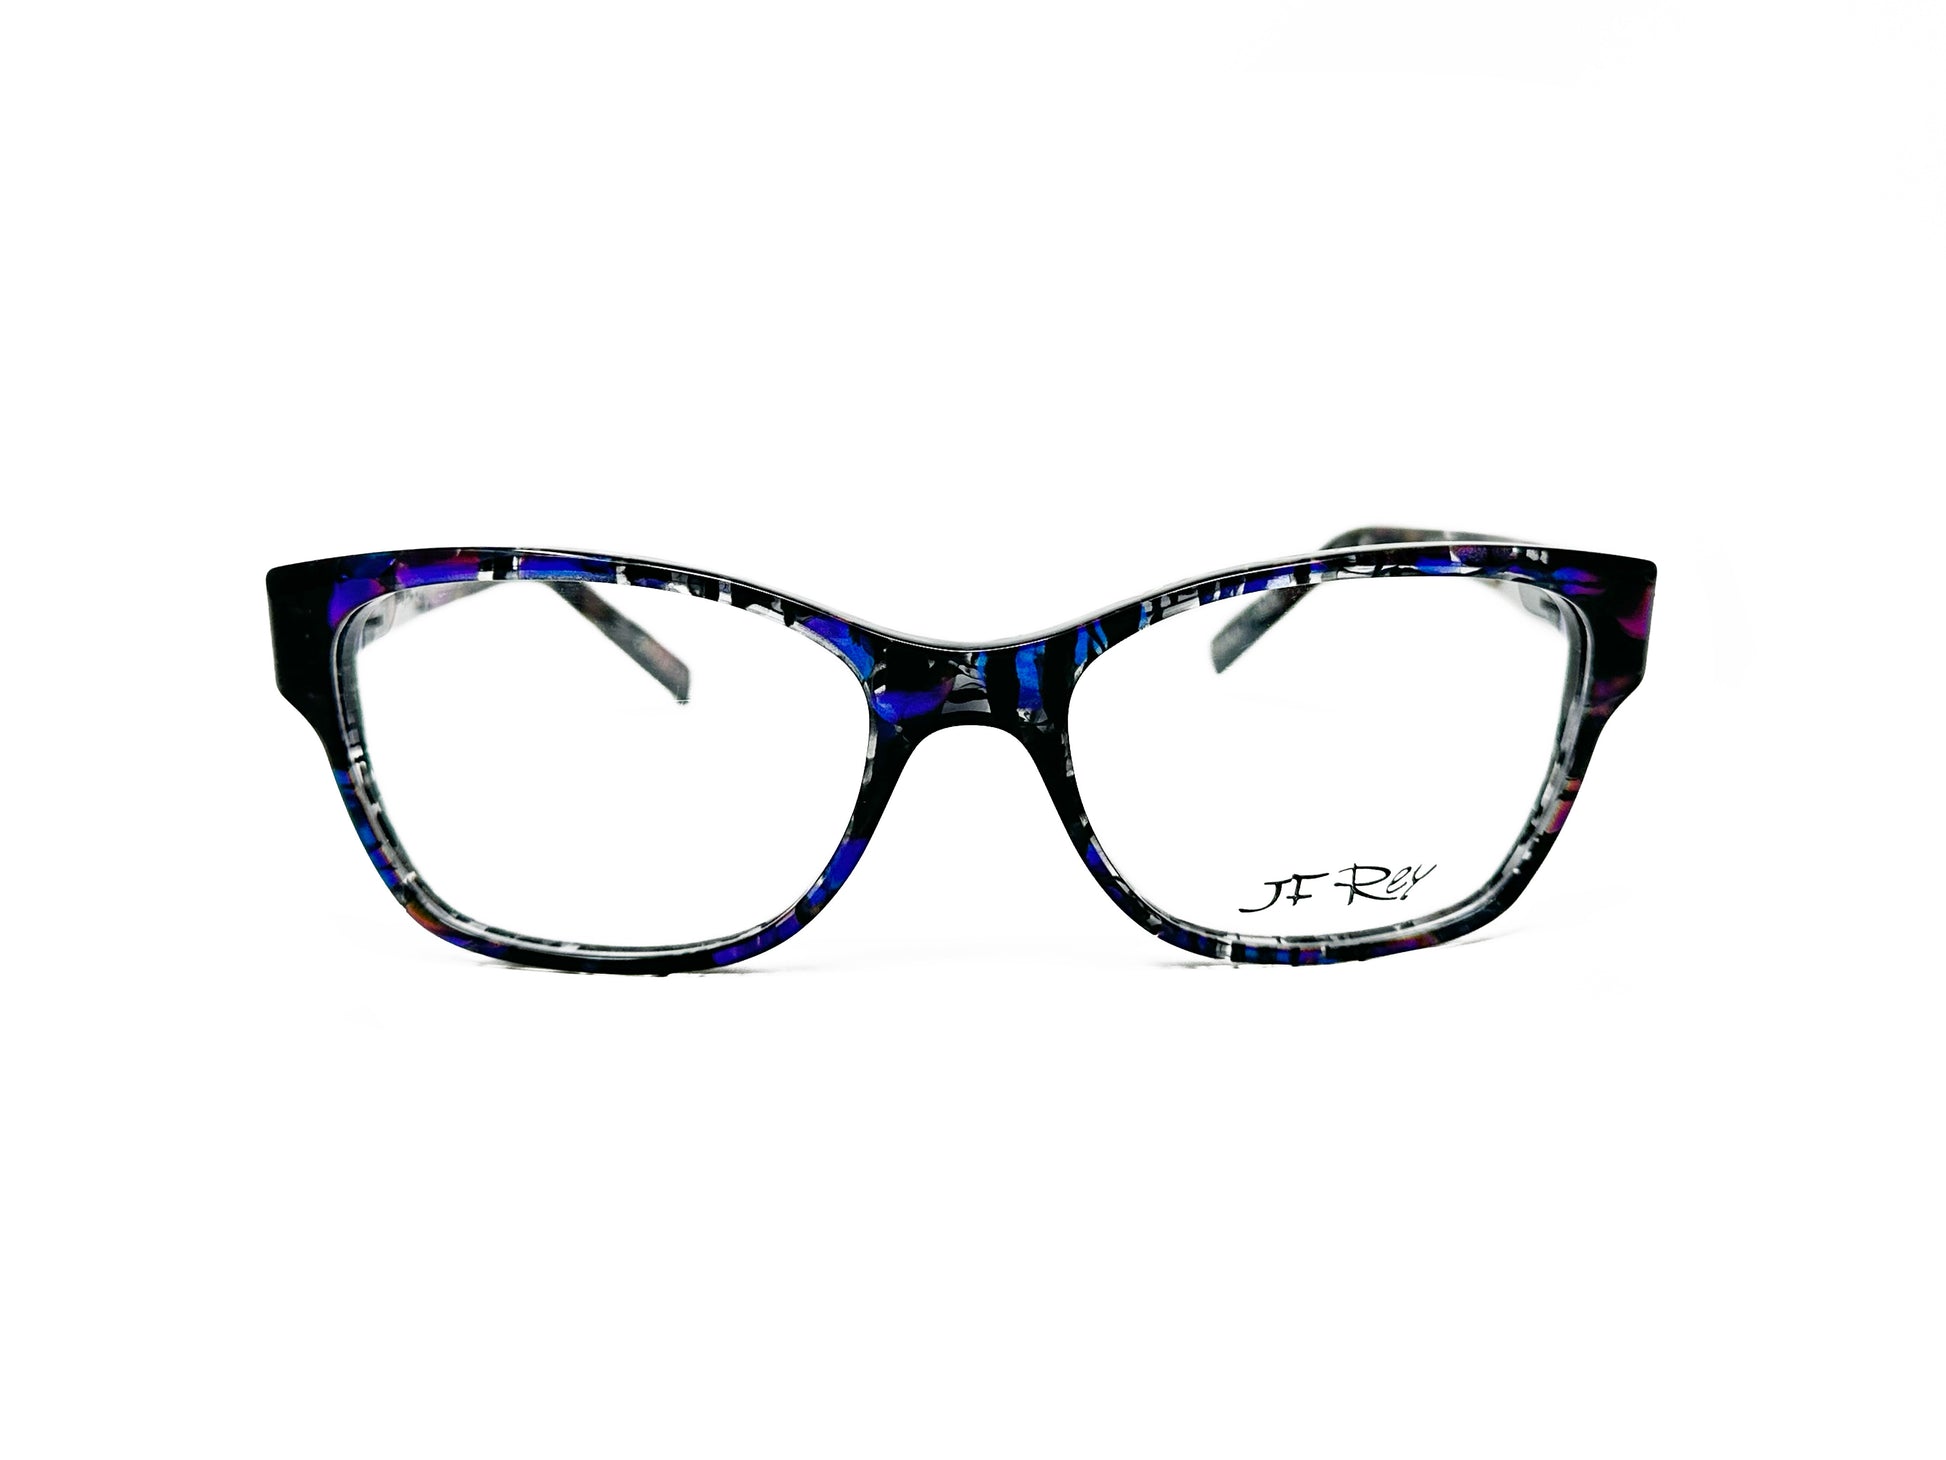 JF Rey square, acetate, optical frame with upward flared angle. Model: JF1310. Color: 2272 - Purple and blue swirl with transparent accents. Front view. 